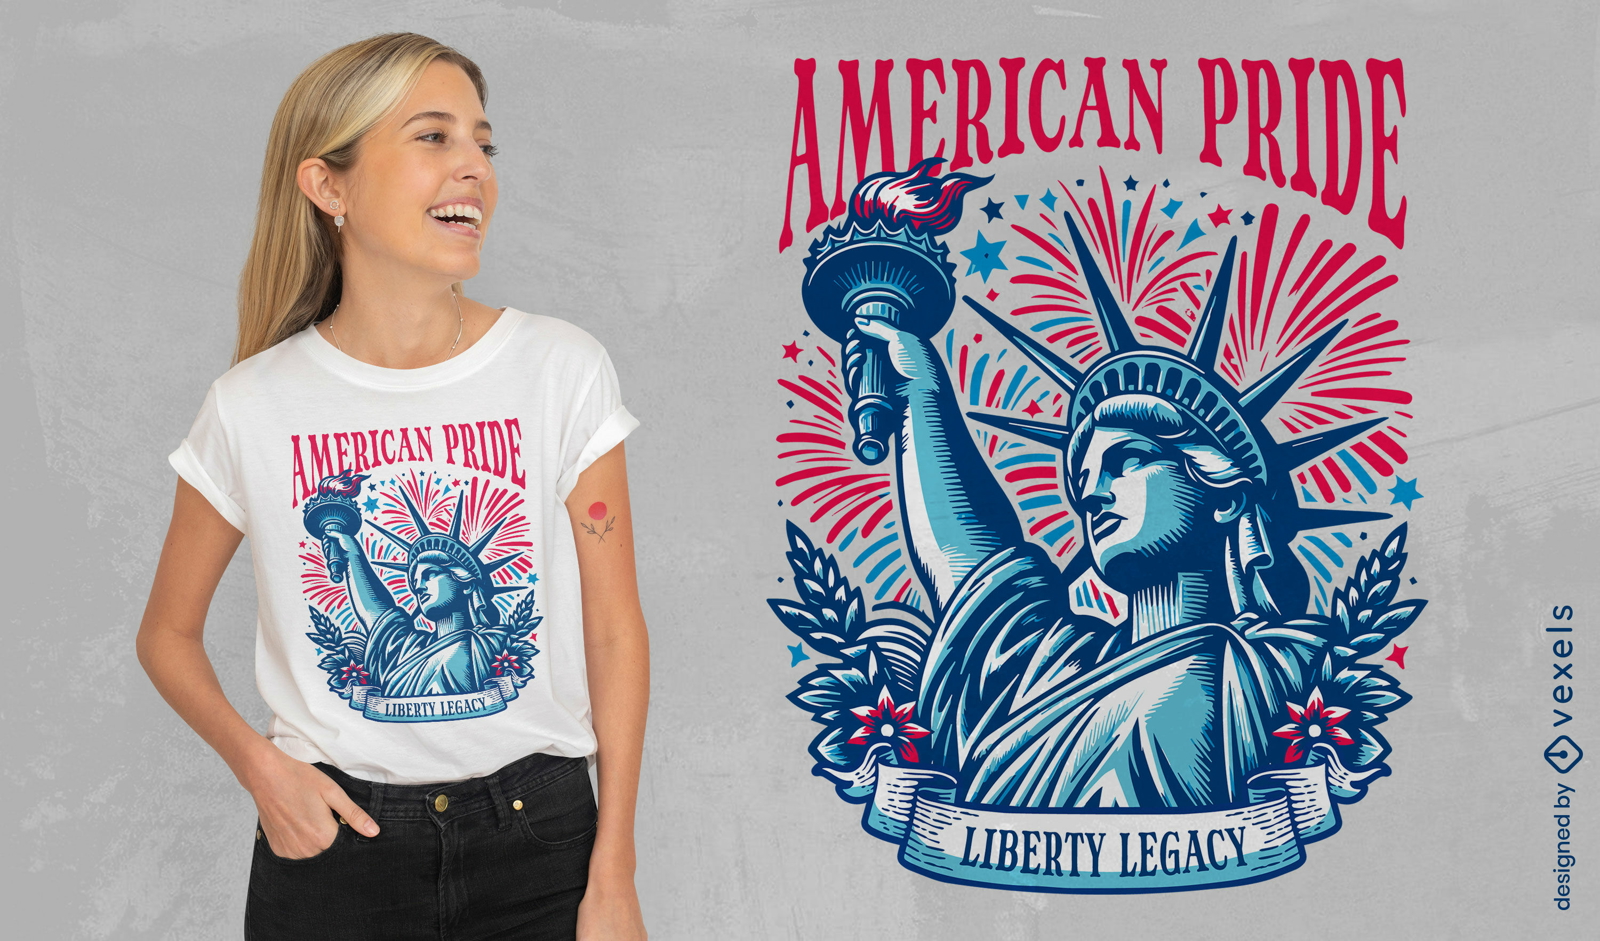 Statue of Liberty and American Pride t-shirt design